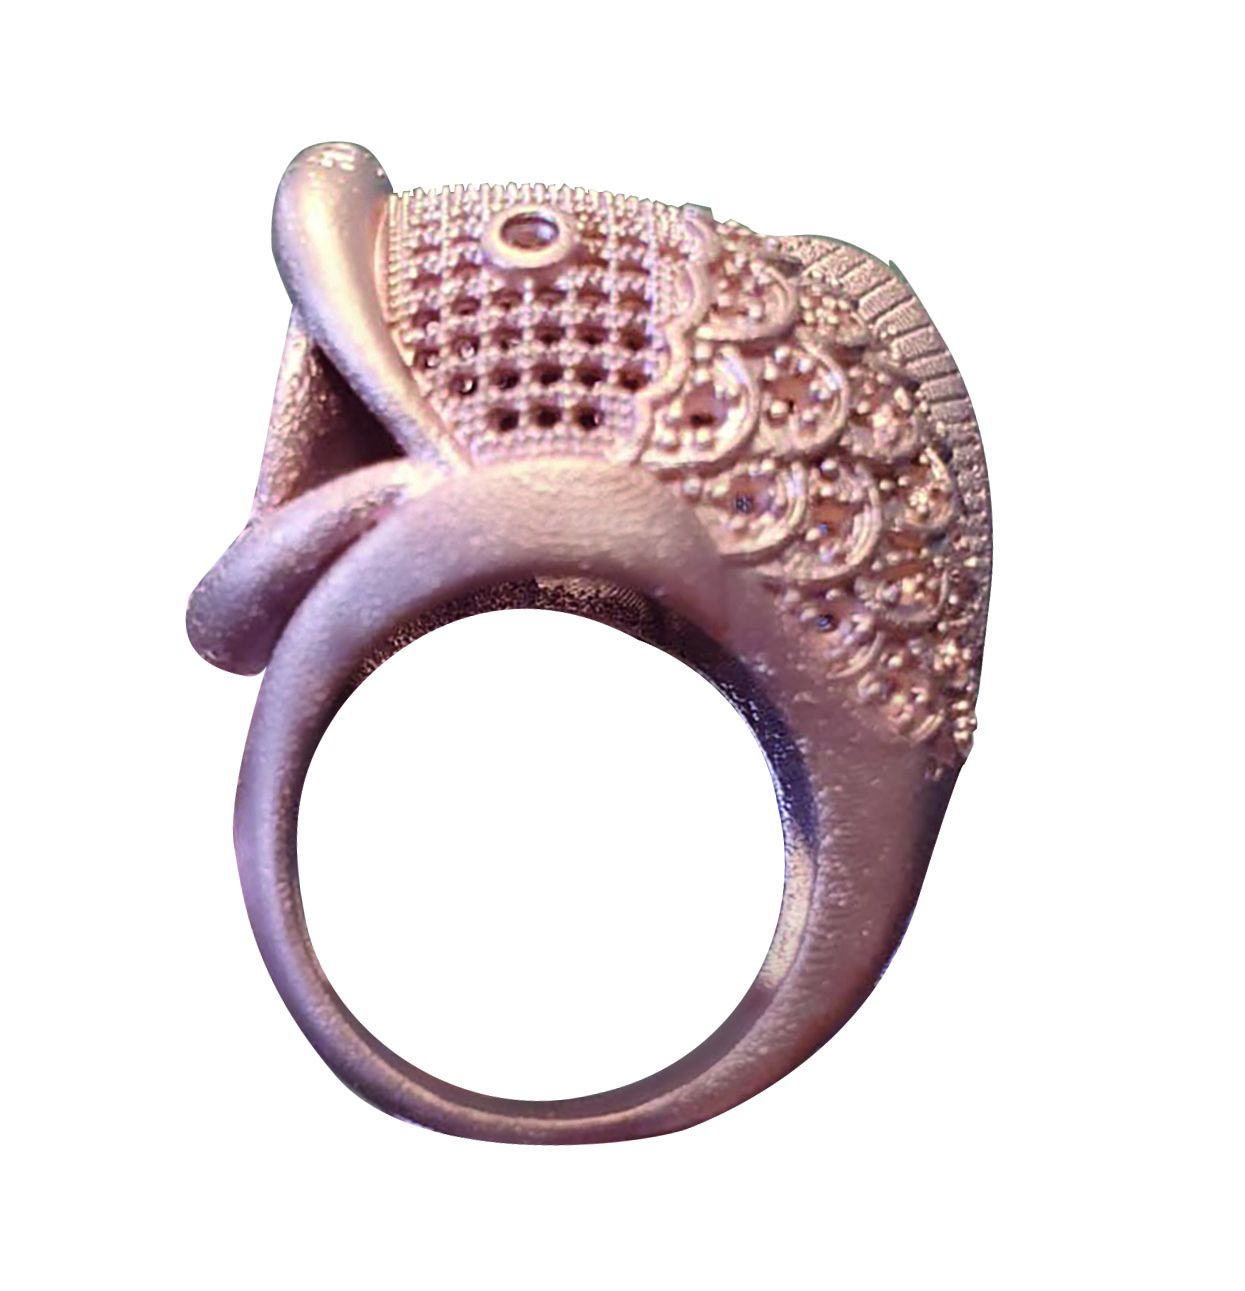 Castable Resin Material for 3D Printing for Jewelry | TIKO-G Pro